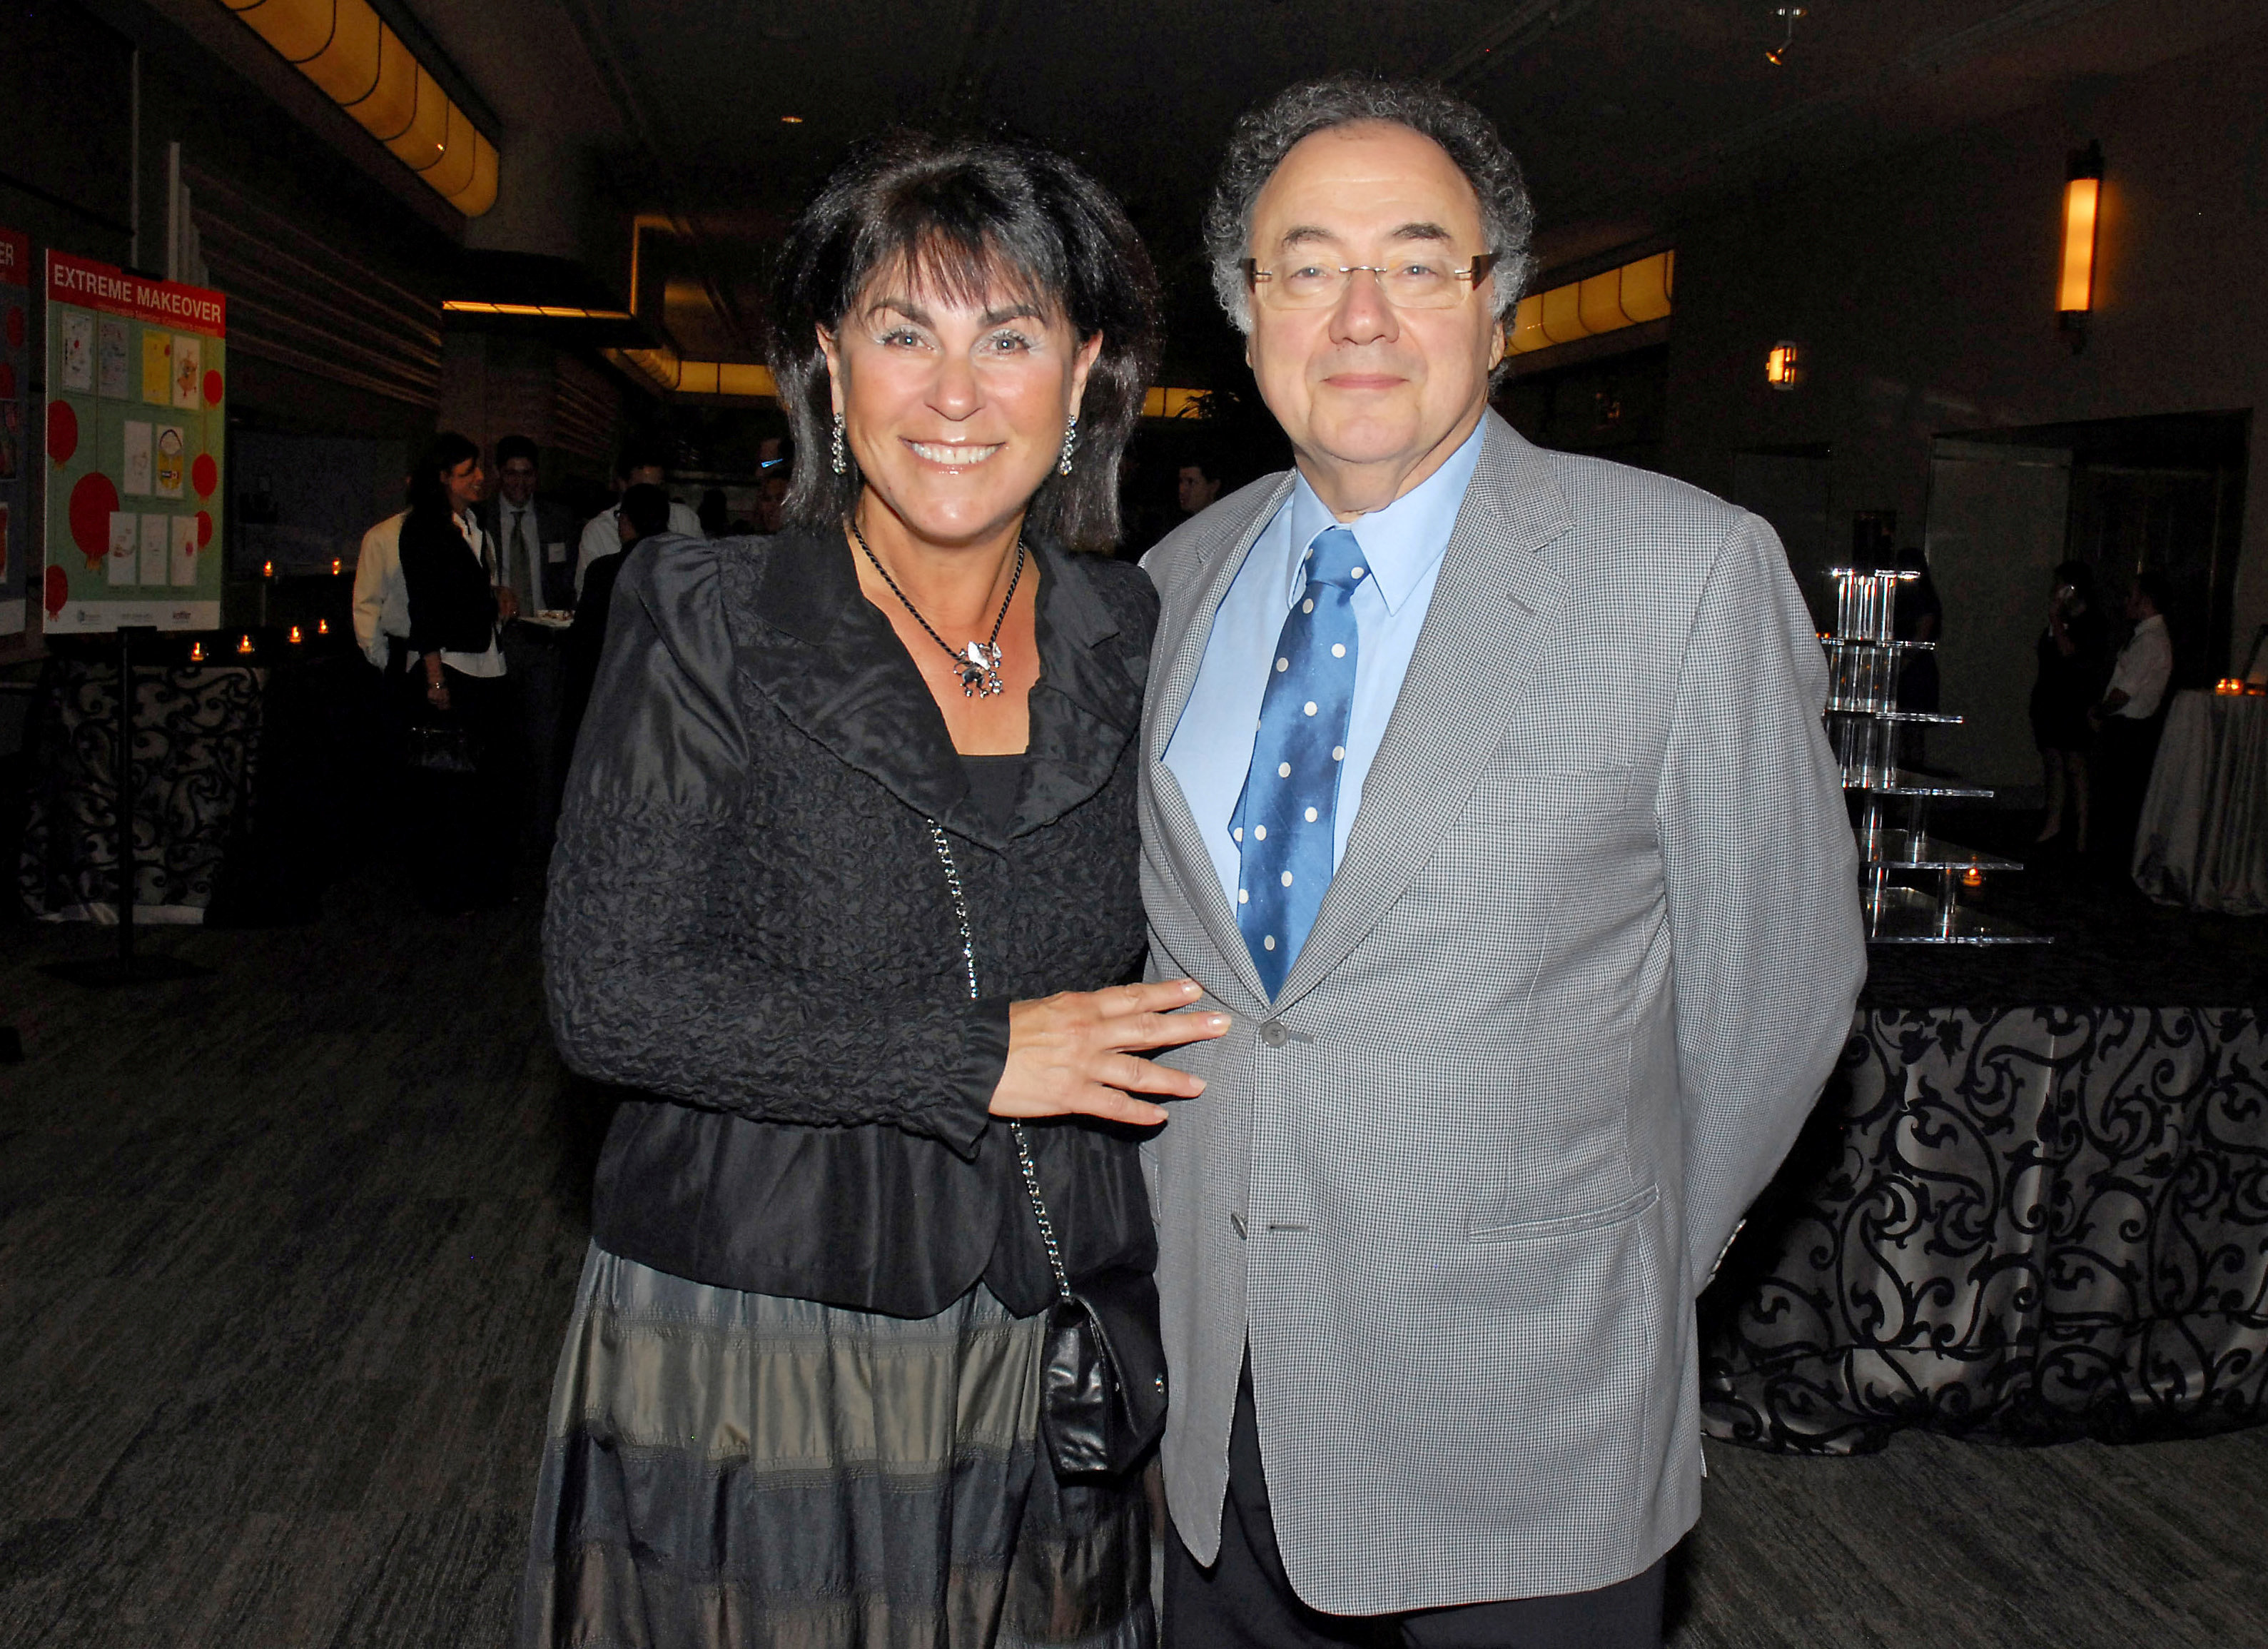 Billionaire Couples Unsolved Murder Captivates Canada HuffPost Latest News pic picture